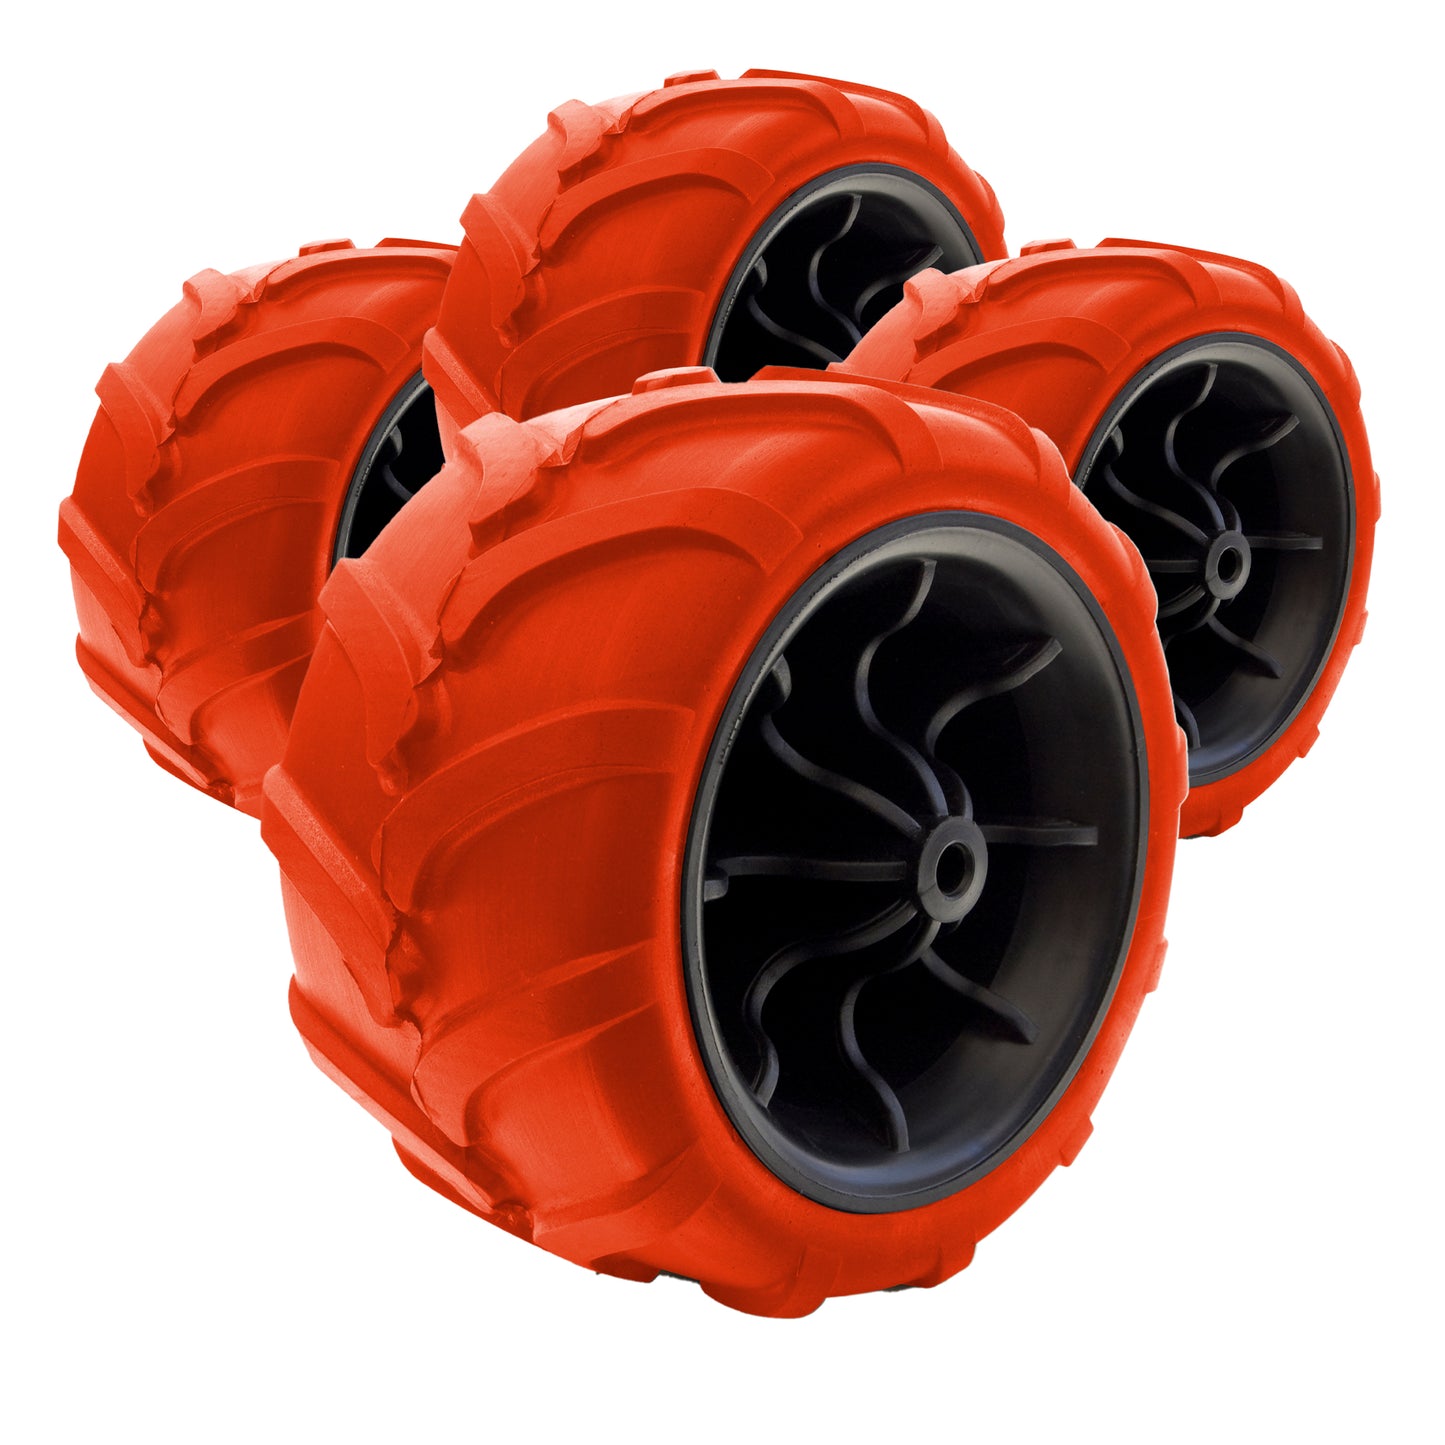 All-Terrain Replacement 7" Wheels | 4 Pack - Creative Wagons